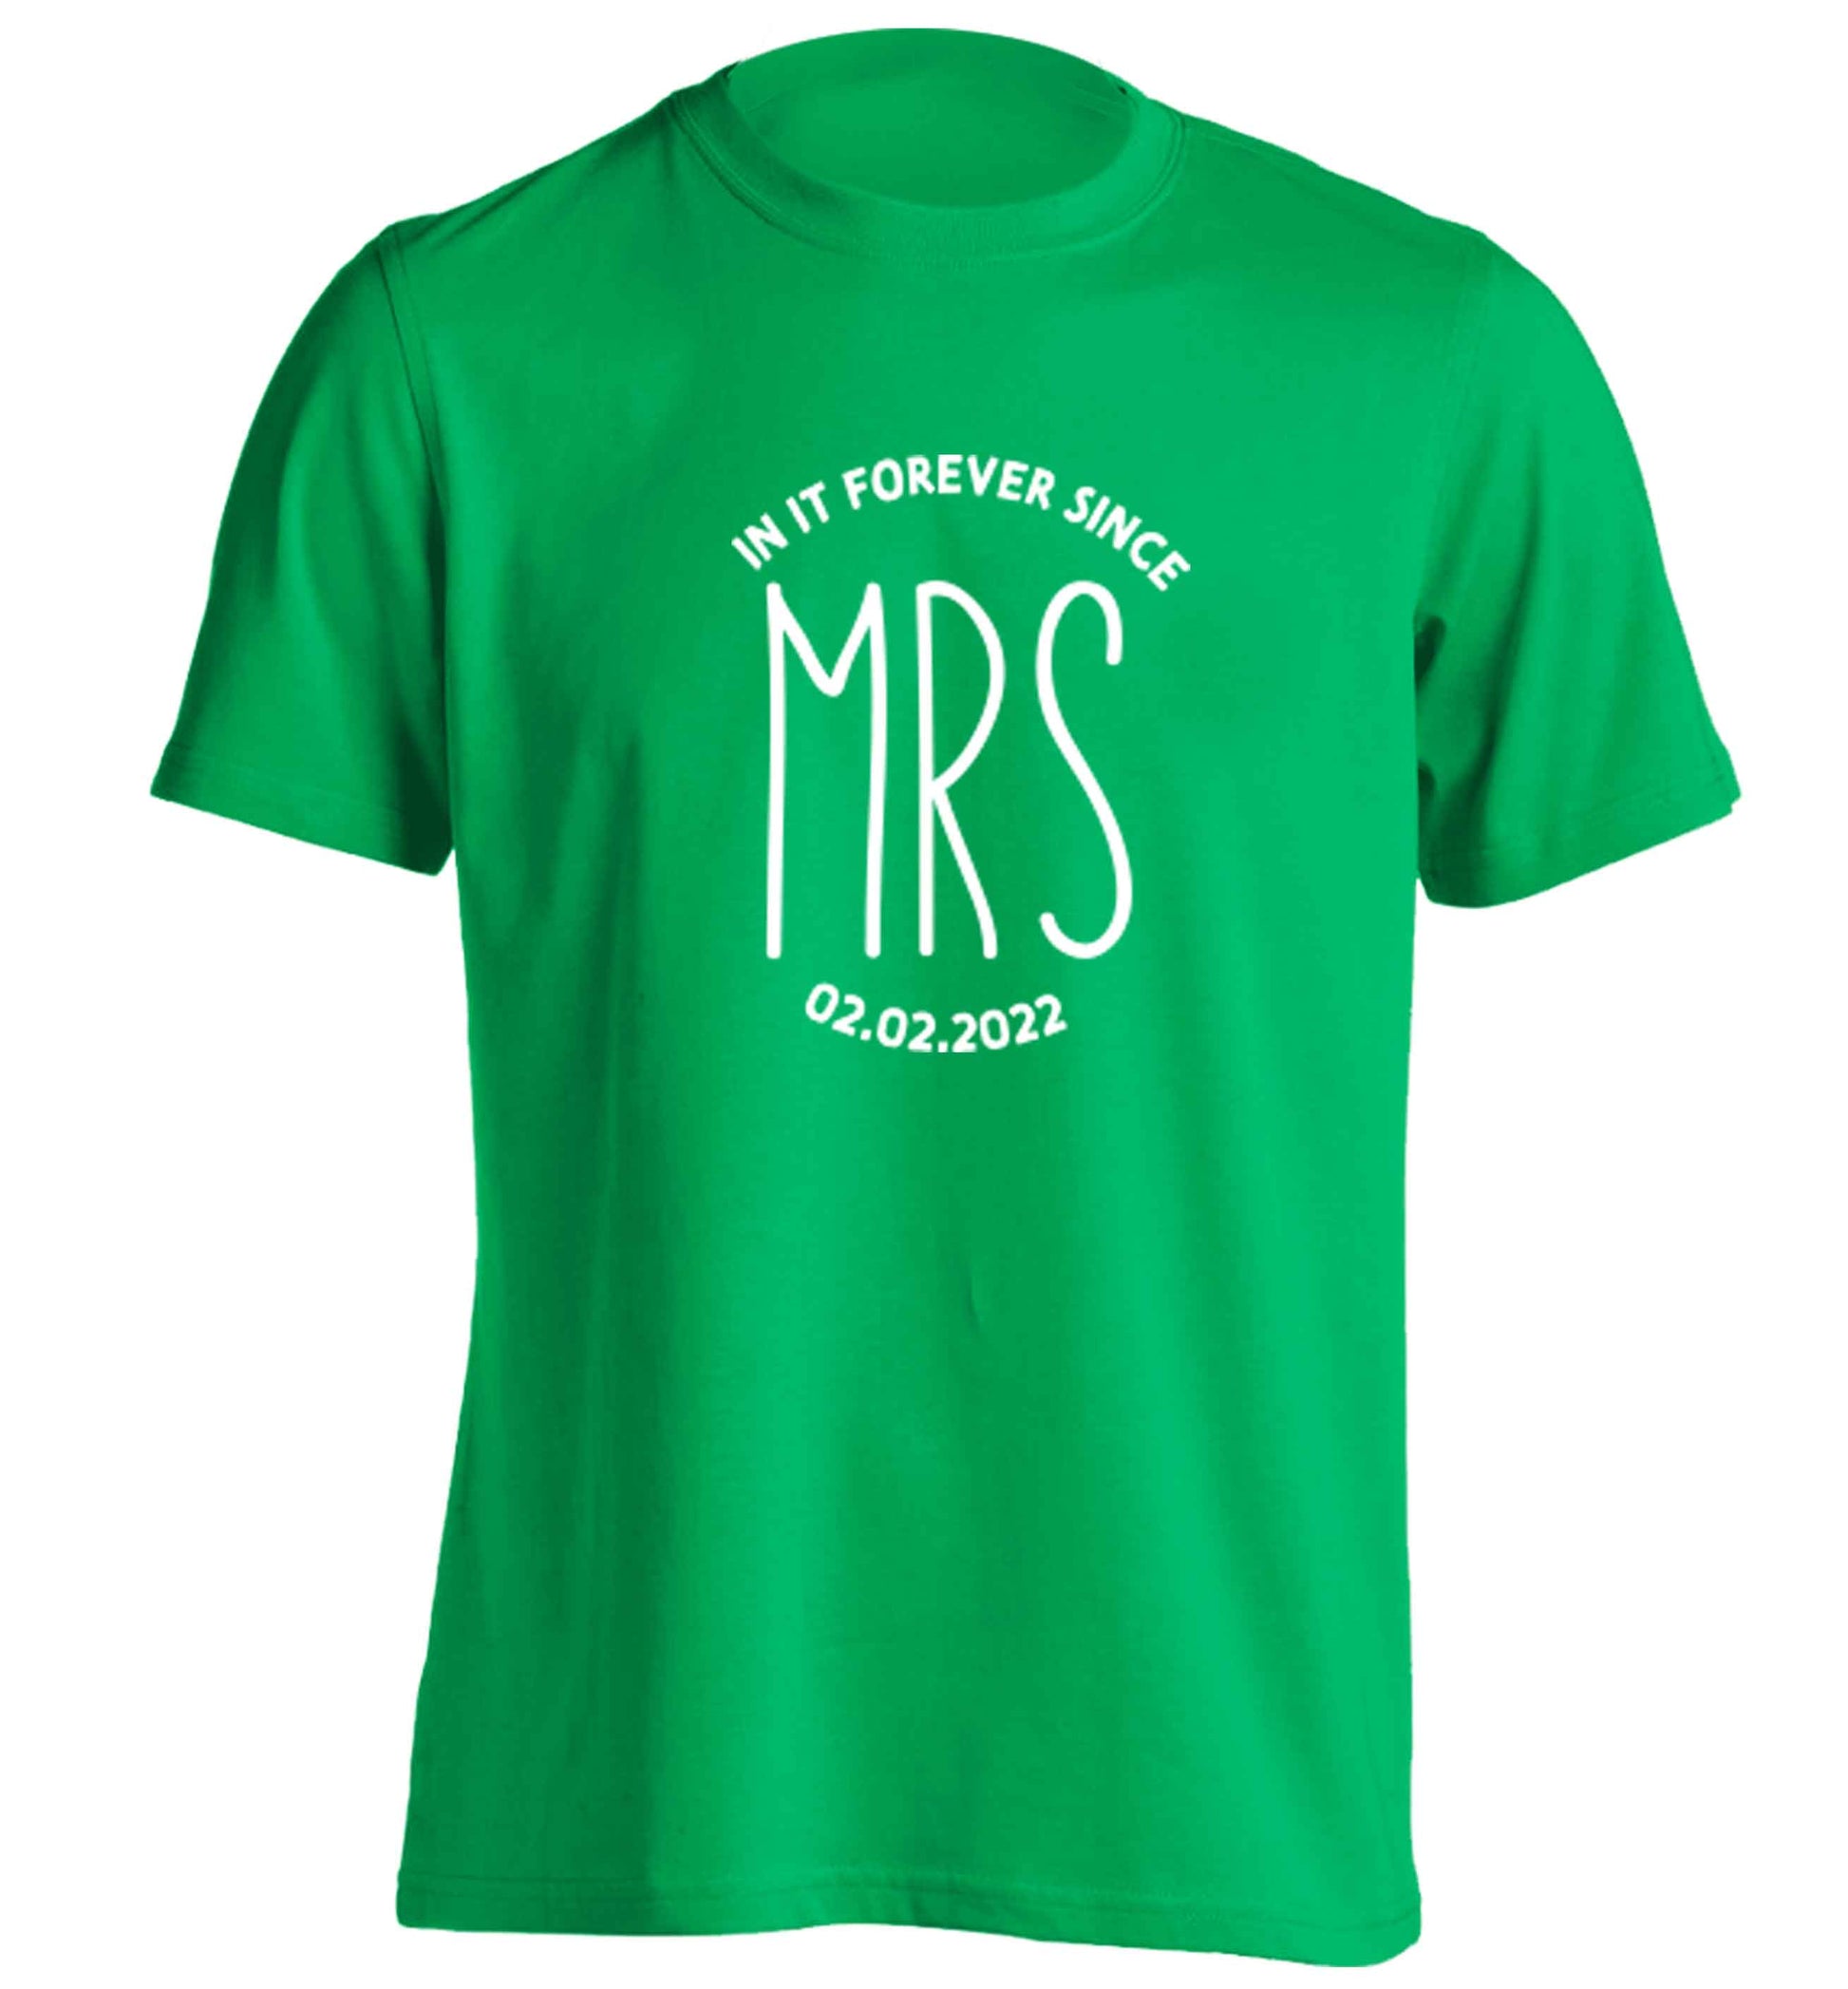 Funny matching gifts for him and her! Get matchy matchy, ideal for newlywed couples or a little valentines gift! adults unisex green Tshirt 2XL